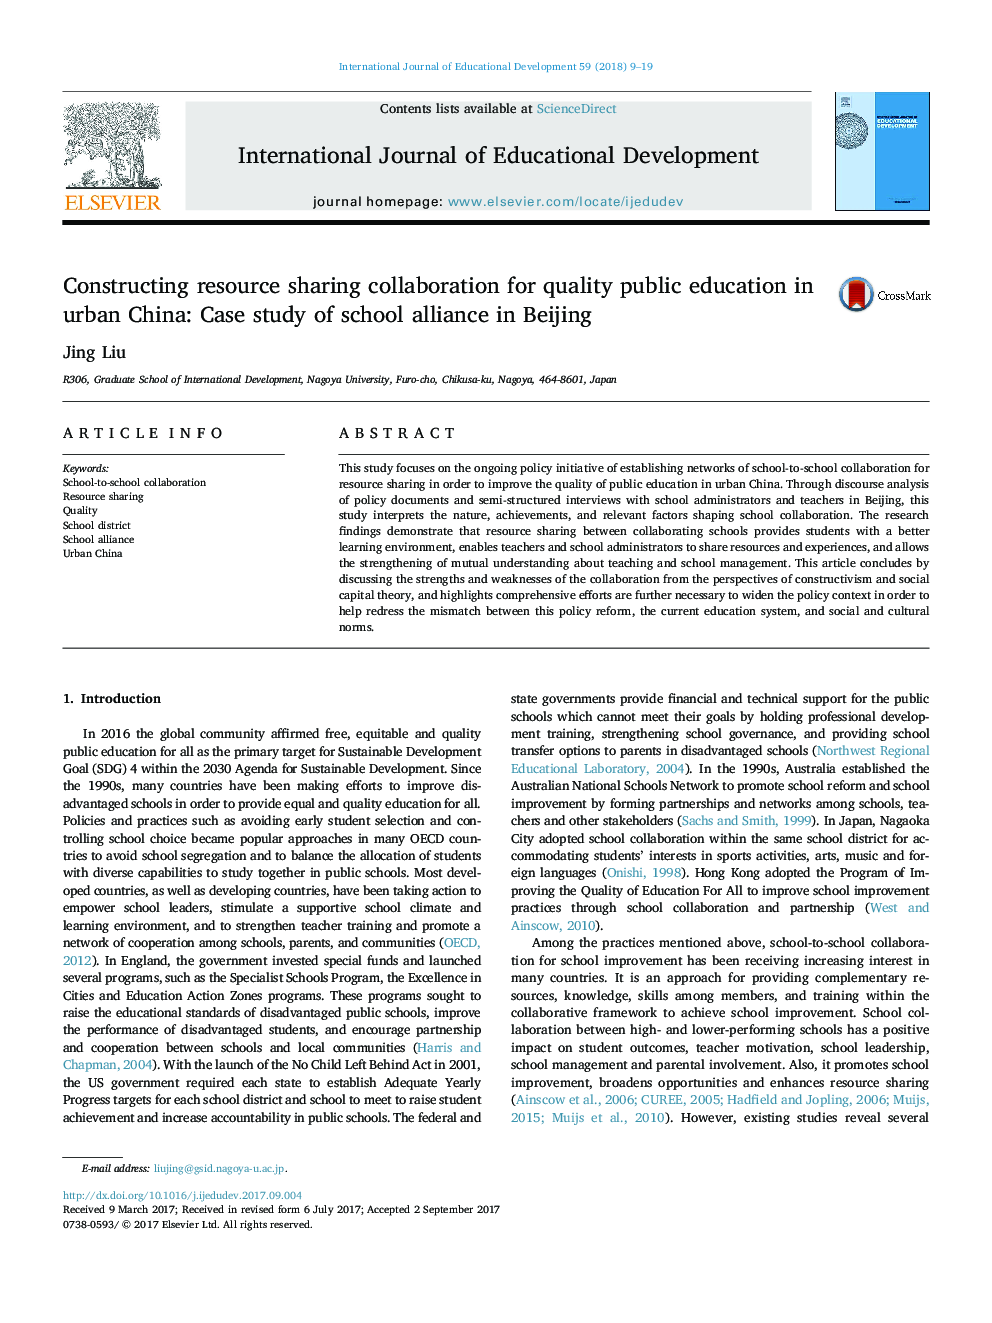 Constructing resource sharing collaboration for quality public education in urban China: Case study of school alliance in Beijing